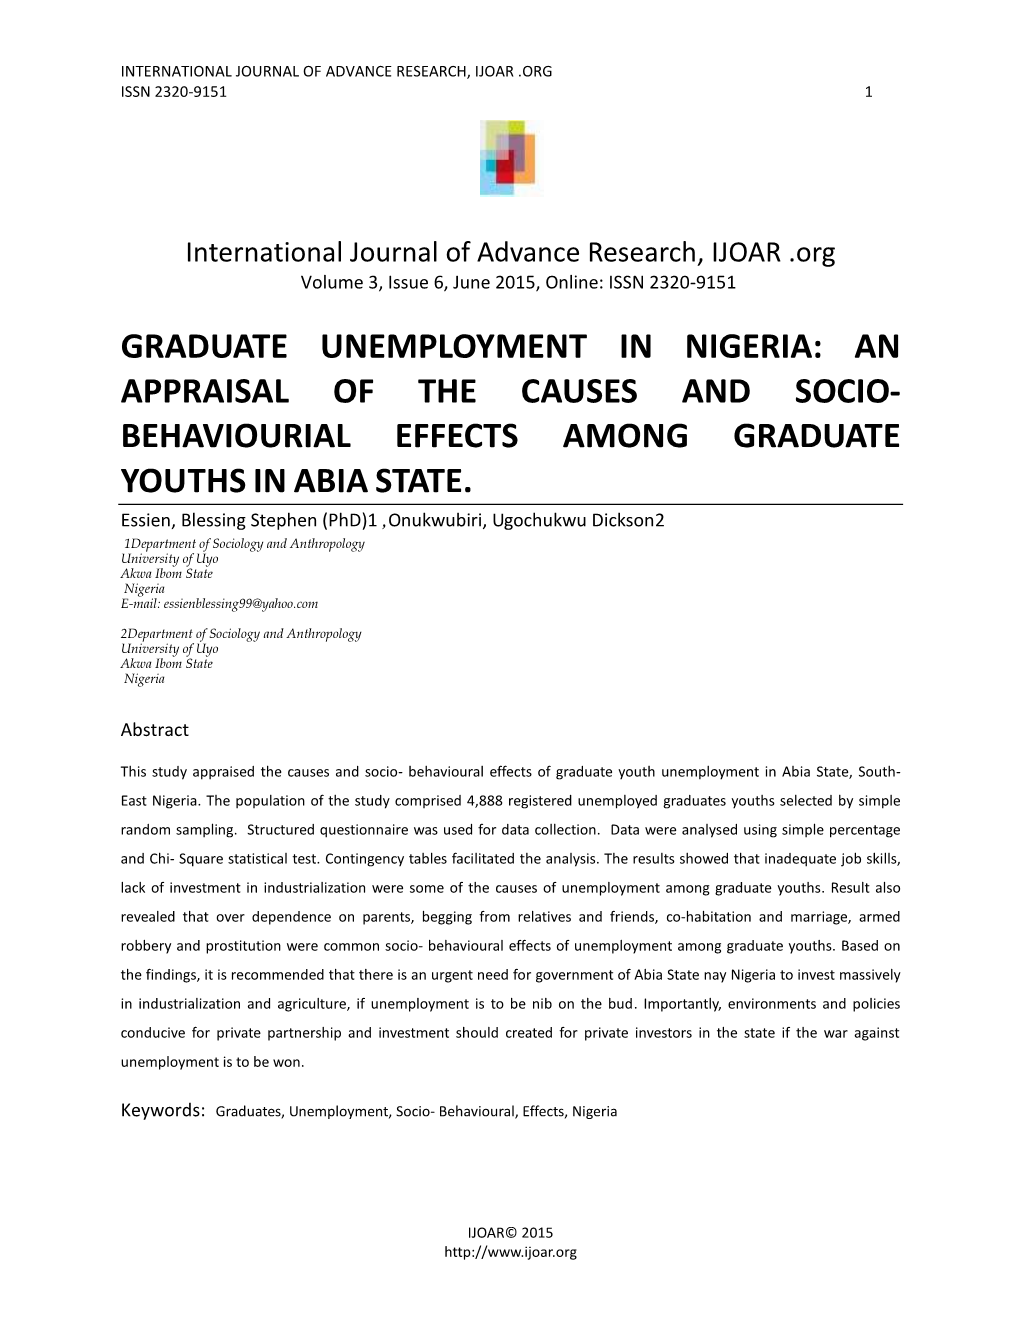 Behaviourial Effects Among Graduate Youthsin Abia State